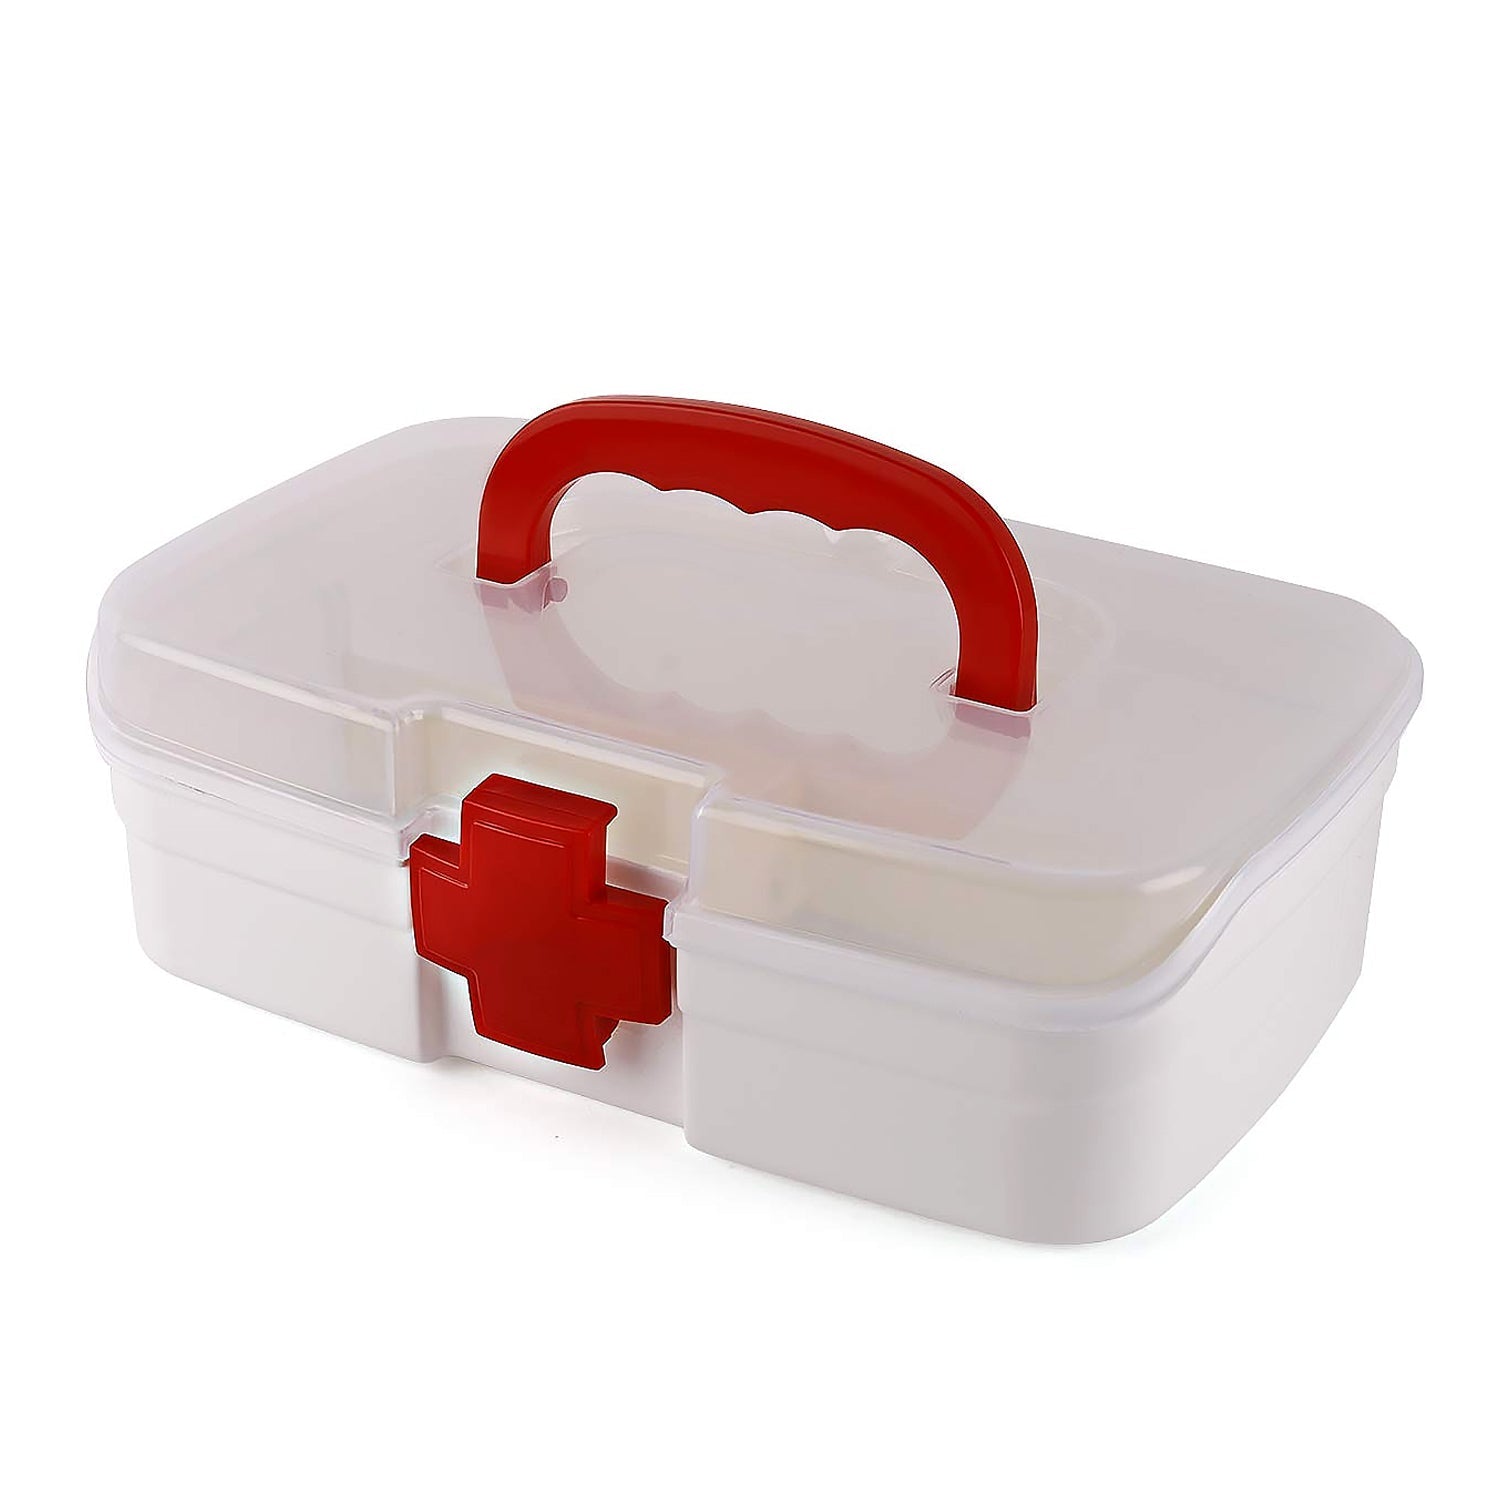 12980 3 Compartment Medical Box, 1 Piece, Indoor Outdoor Medical Utility, Medicine Storage Box, Detachable Tray Medical Box Multi Purpose Regular Medicine, First Aid Box with Handle, Transparent Lid & Color Box 